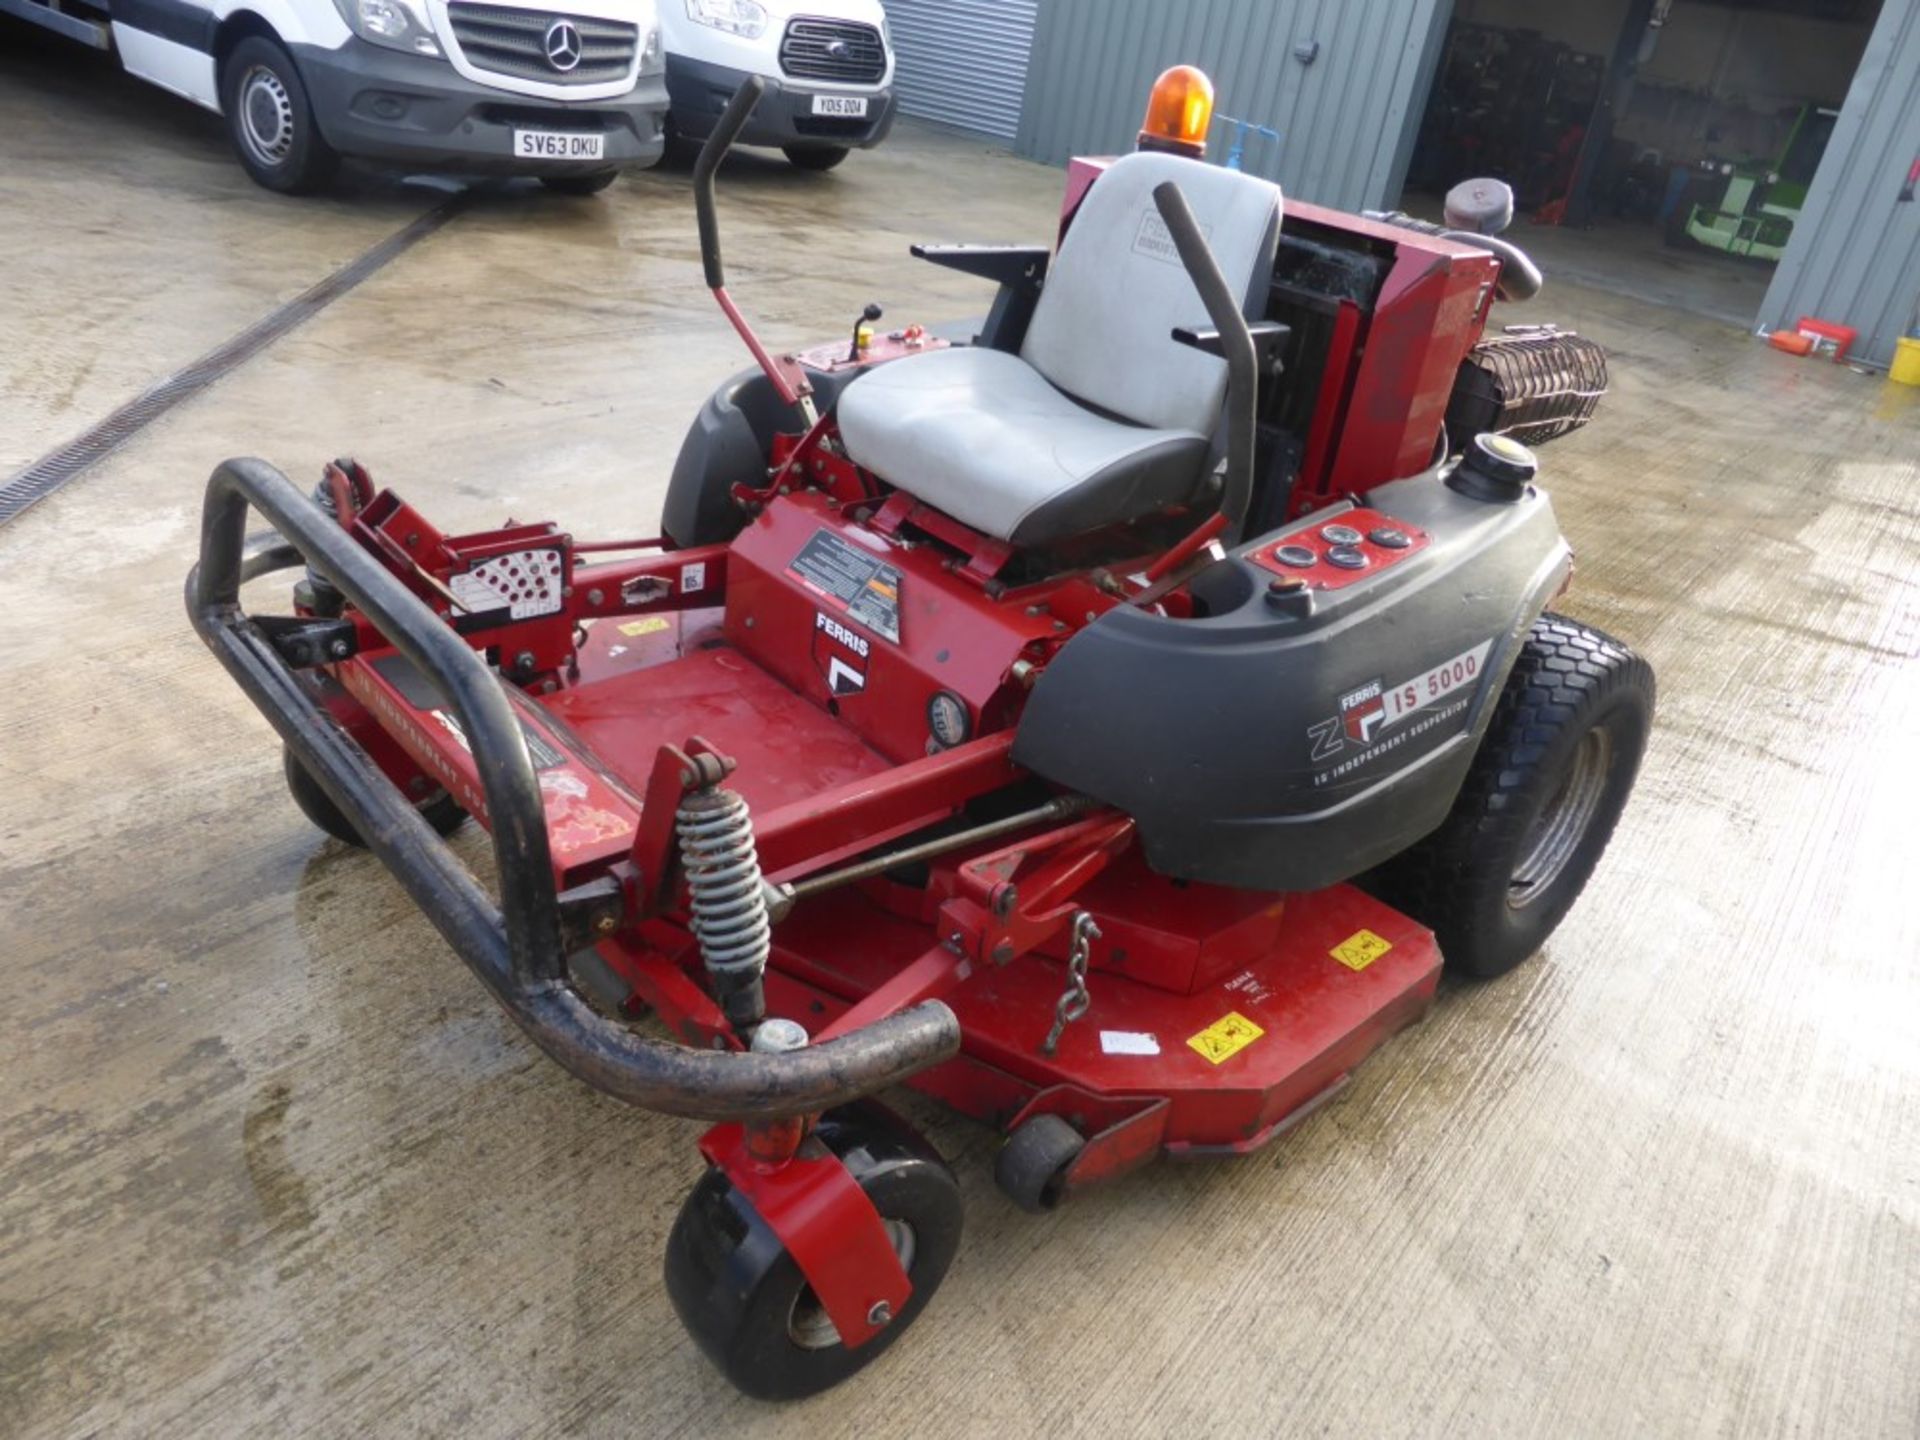 54 reg FERRIS IS5000 ZERO MOWER (LOCATION PAIDHAM) 61" DECK, 33HP, 1058 HOURS, NO V5 (RING FOR - Image 2 of 6